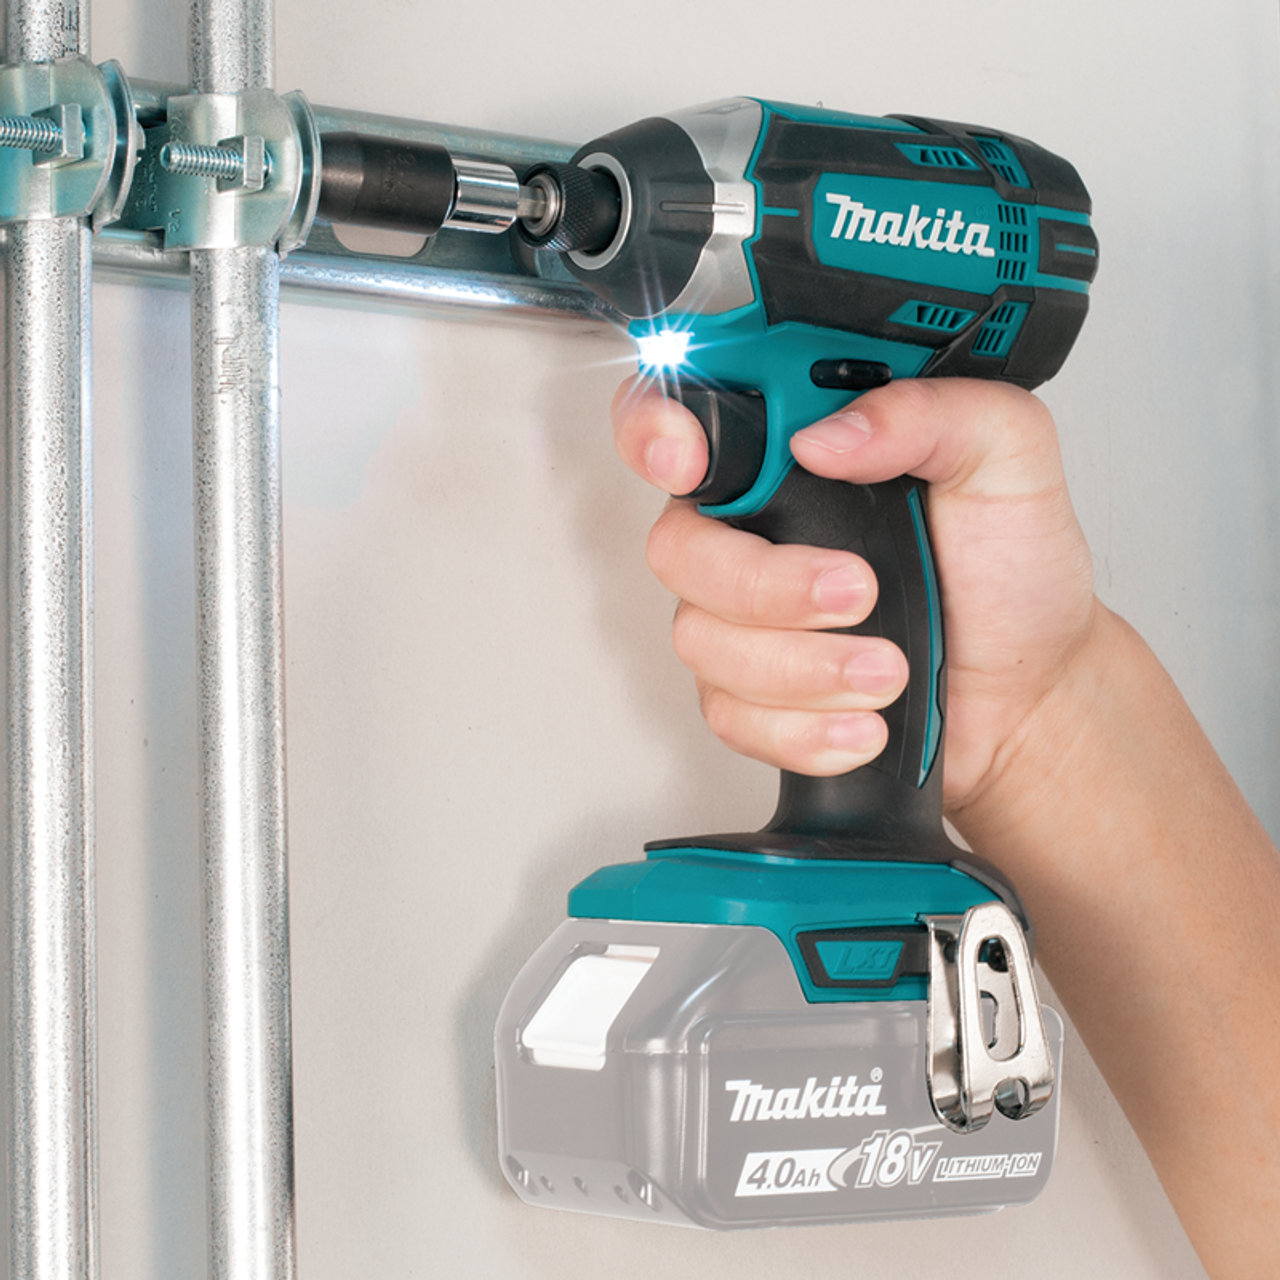 18V LXT? Lithium-Ion Cordless Impact Driver, Tool Only, Compact and ergonomic design, XDT11Z